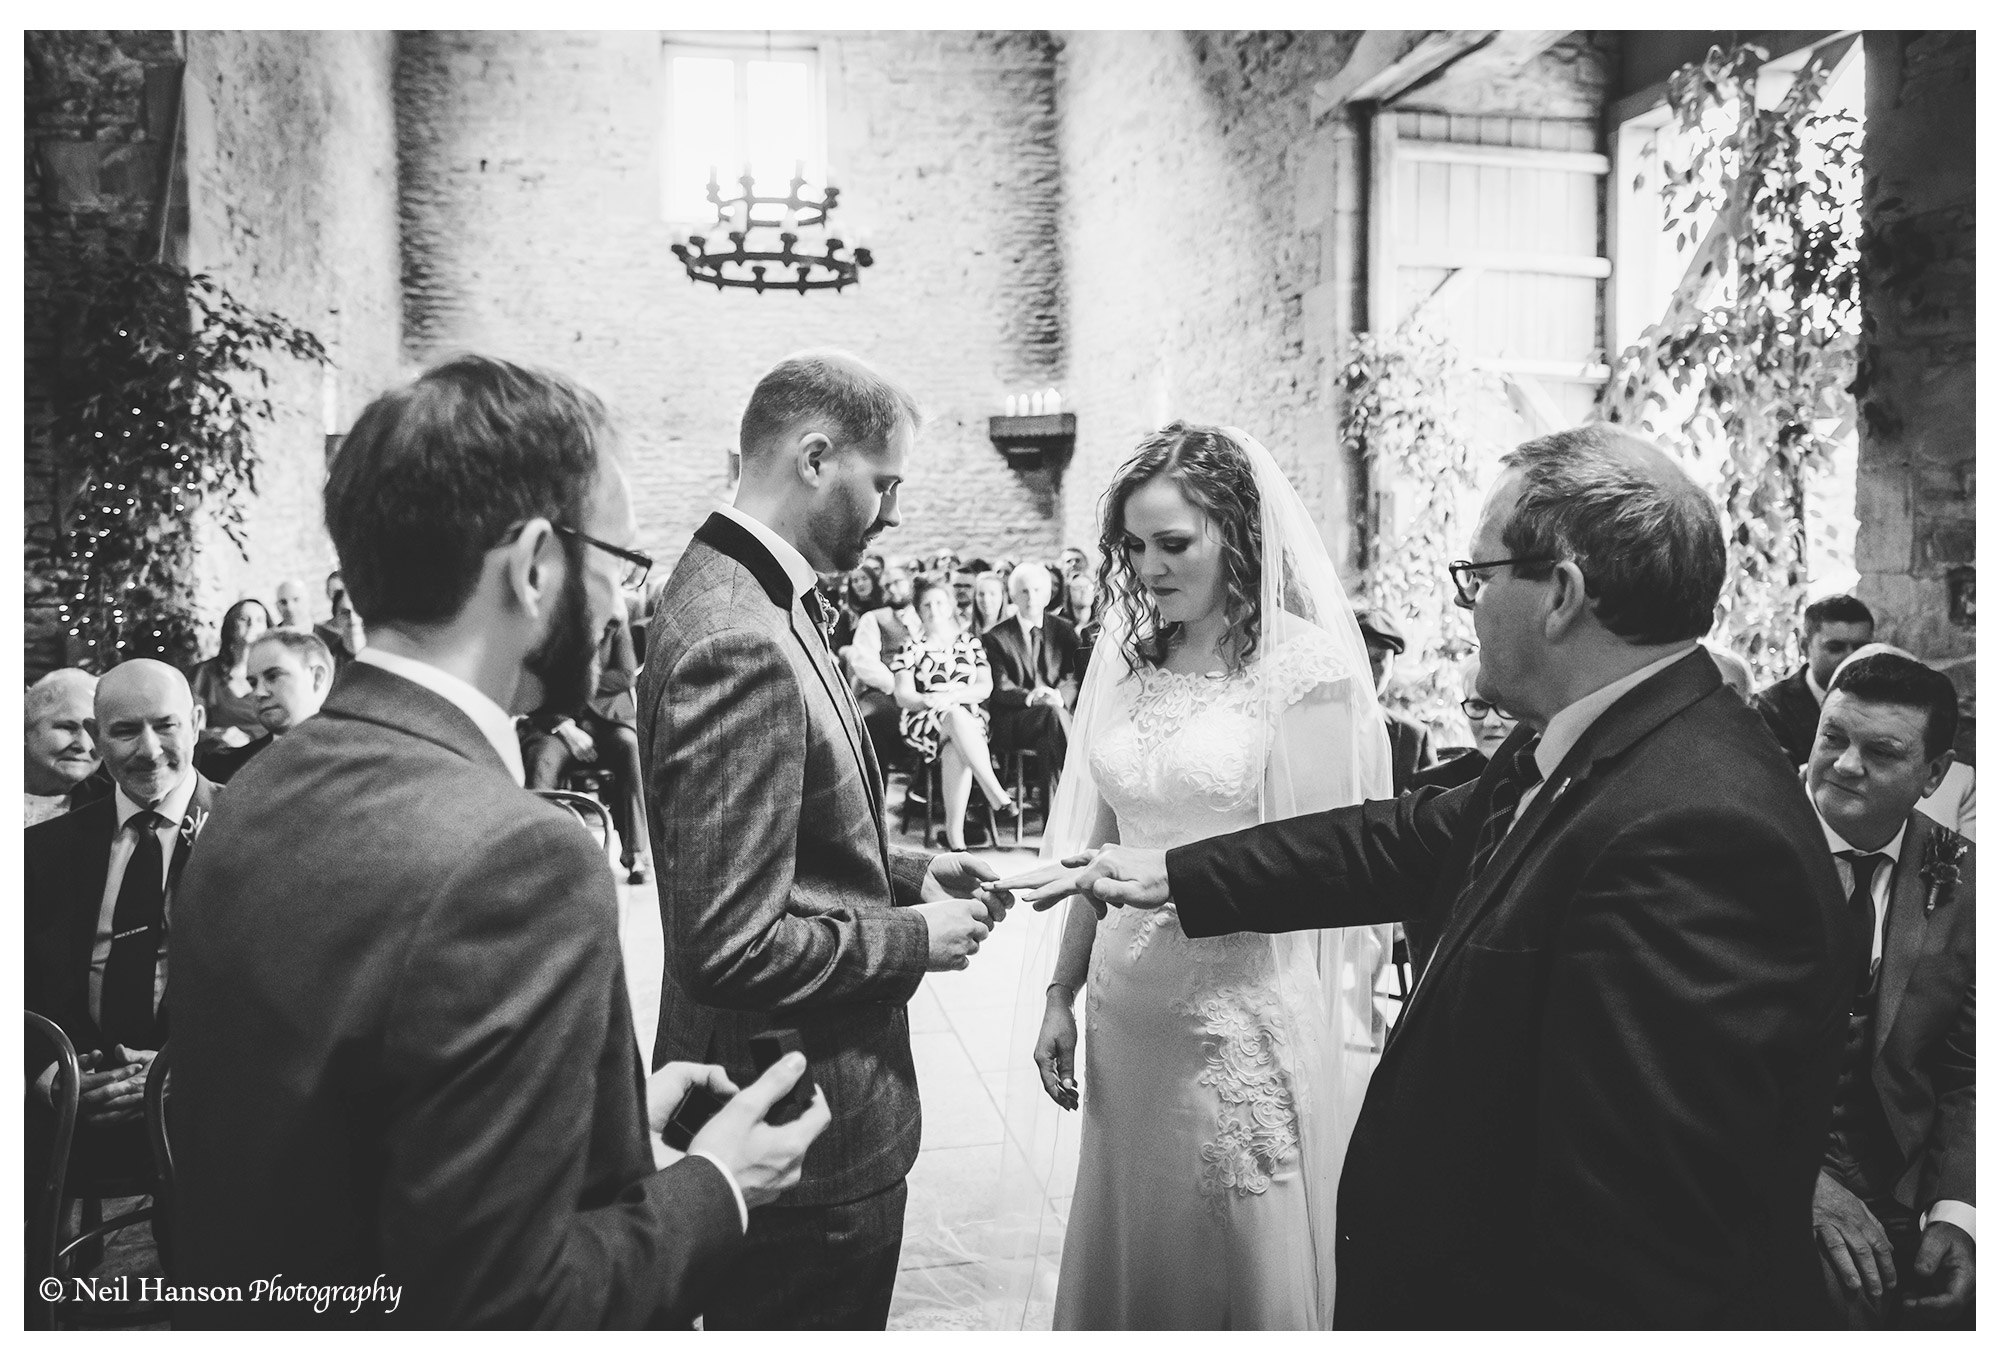 Bride & Groom exchange rings during their wedding ceremony at Cripps Stone Barn